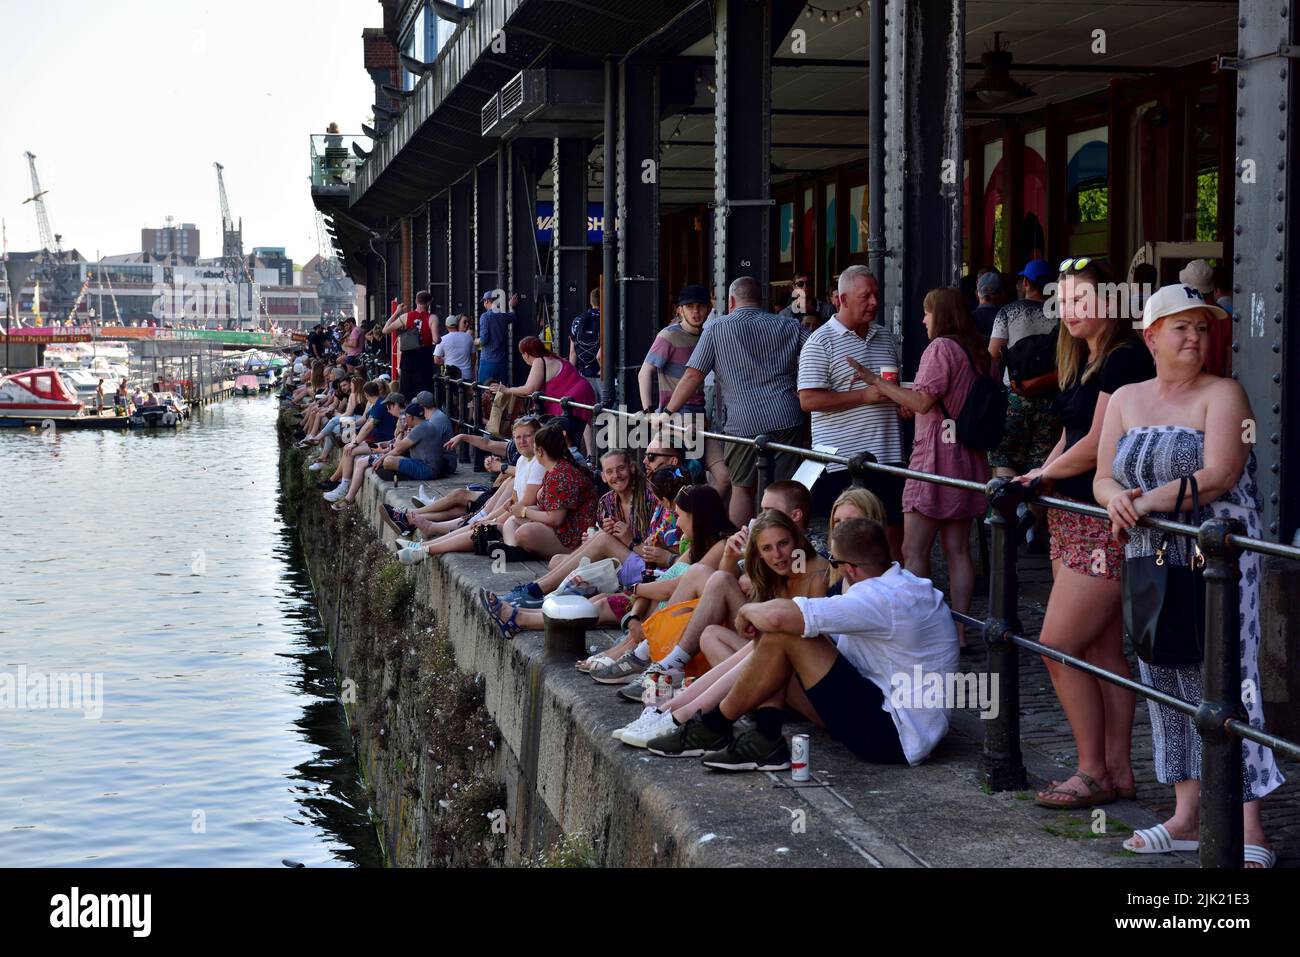 Crowd of people sitting in the shade along Bristol Harbour dock on a sunny hot day during harbour festival, UK Stock Photo